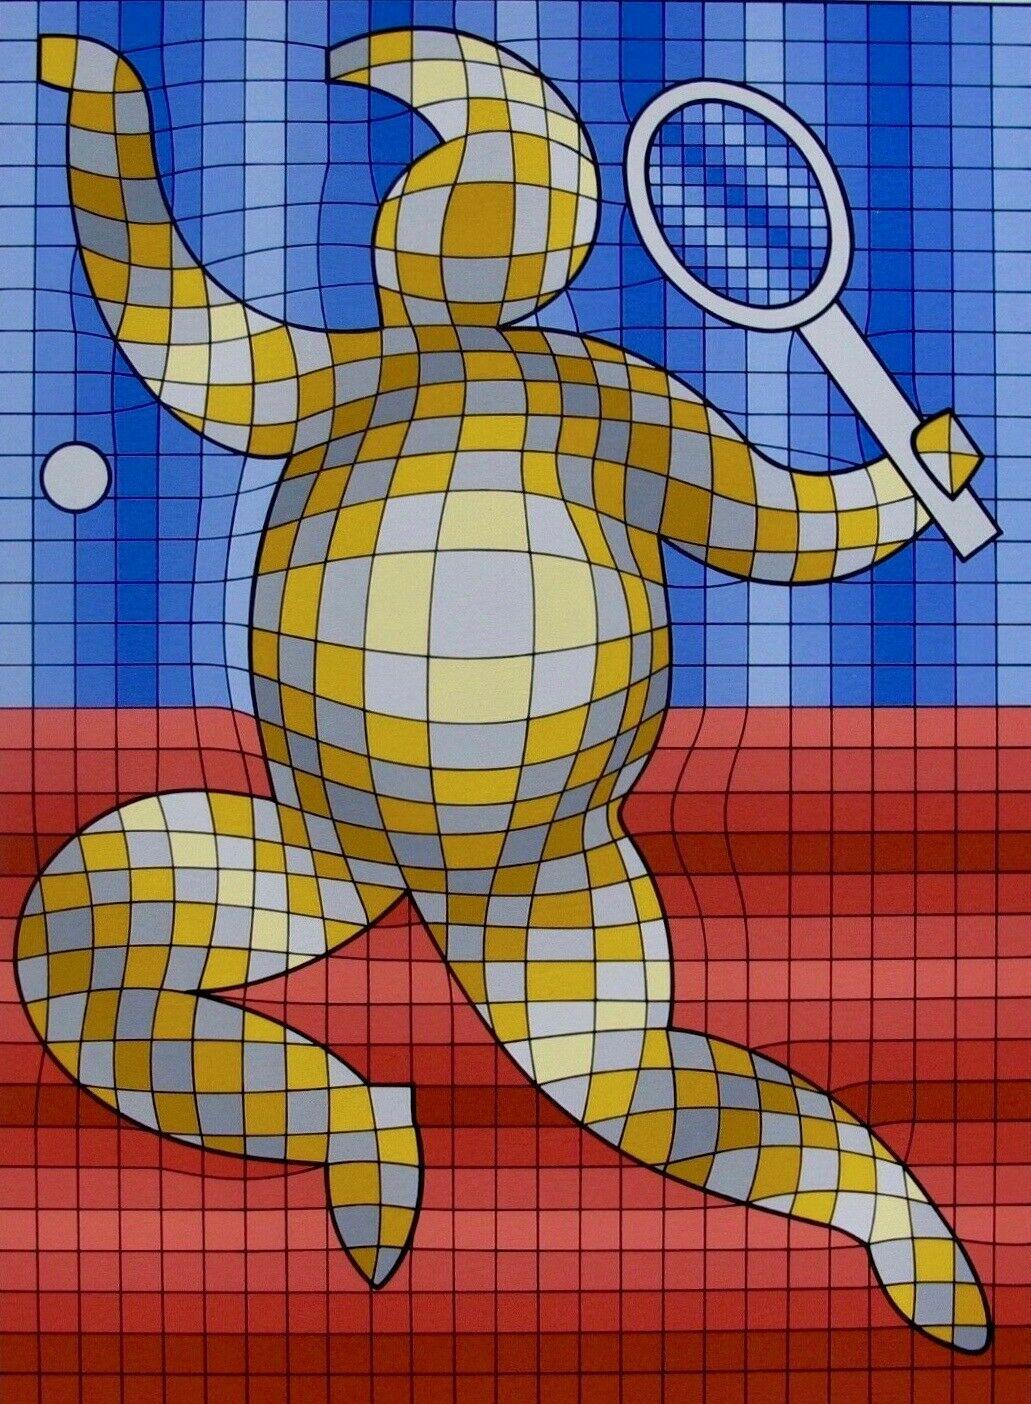 Artist: Victor Vasarely (1908-1997)
Title: Tennis Player
Year: 1978
Medium: Silkscreen on Arches paper
Edition: 300, plus proofs
Size: 18 x 14.5 inches
Condition: Excellent
Inscription: Signed and numbered by the artist.
Notes:  Published by Atelier